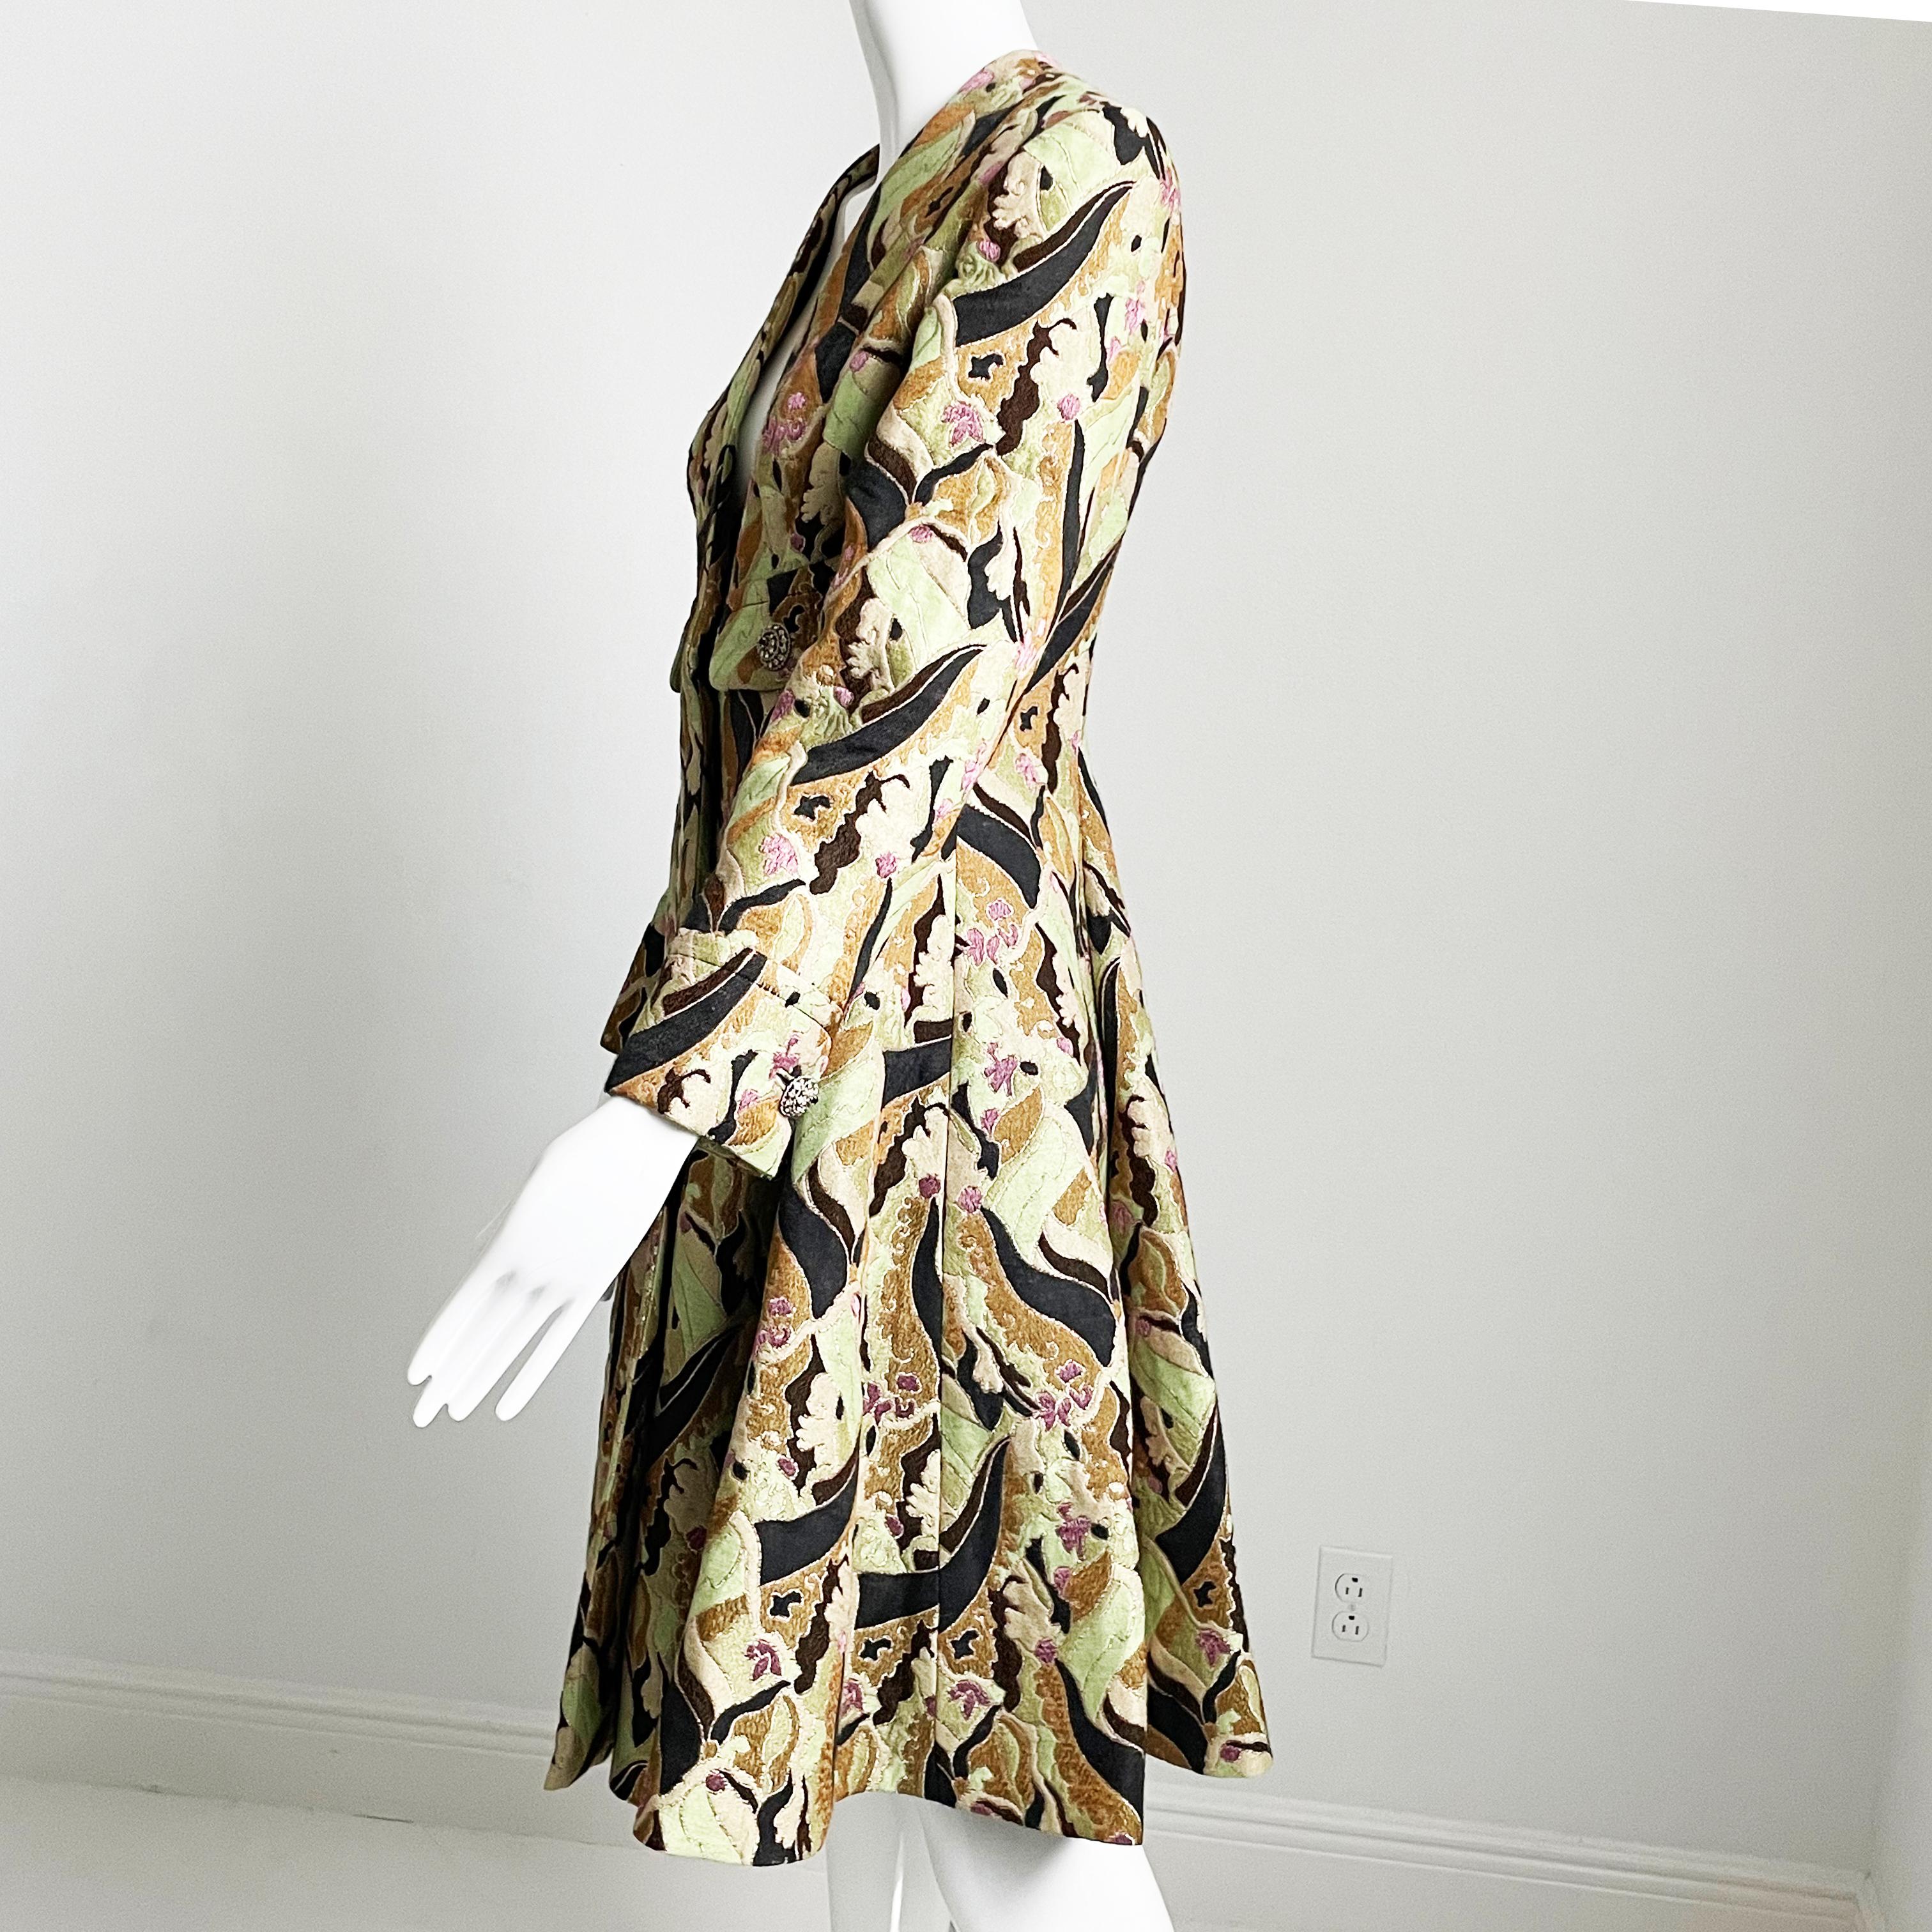 James Galanos Brocade Coat or Dress Amelia Gray Boutique Beverly Hills 1960s For Sale 4